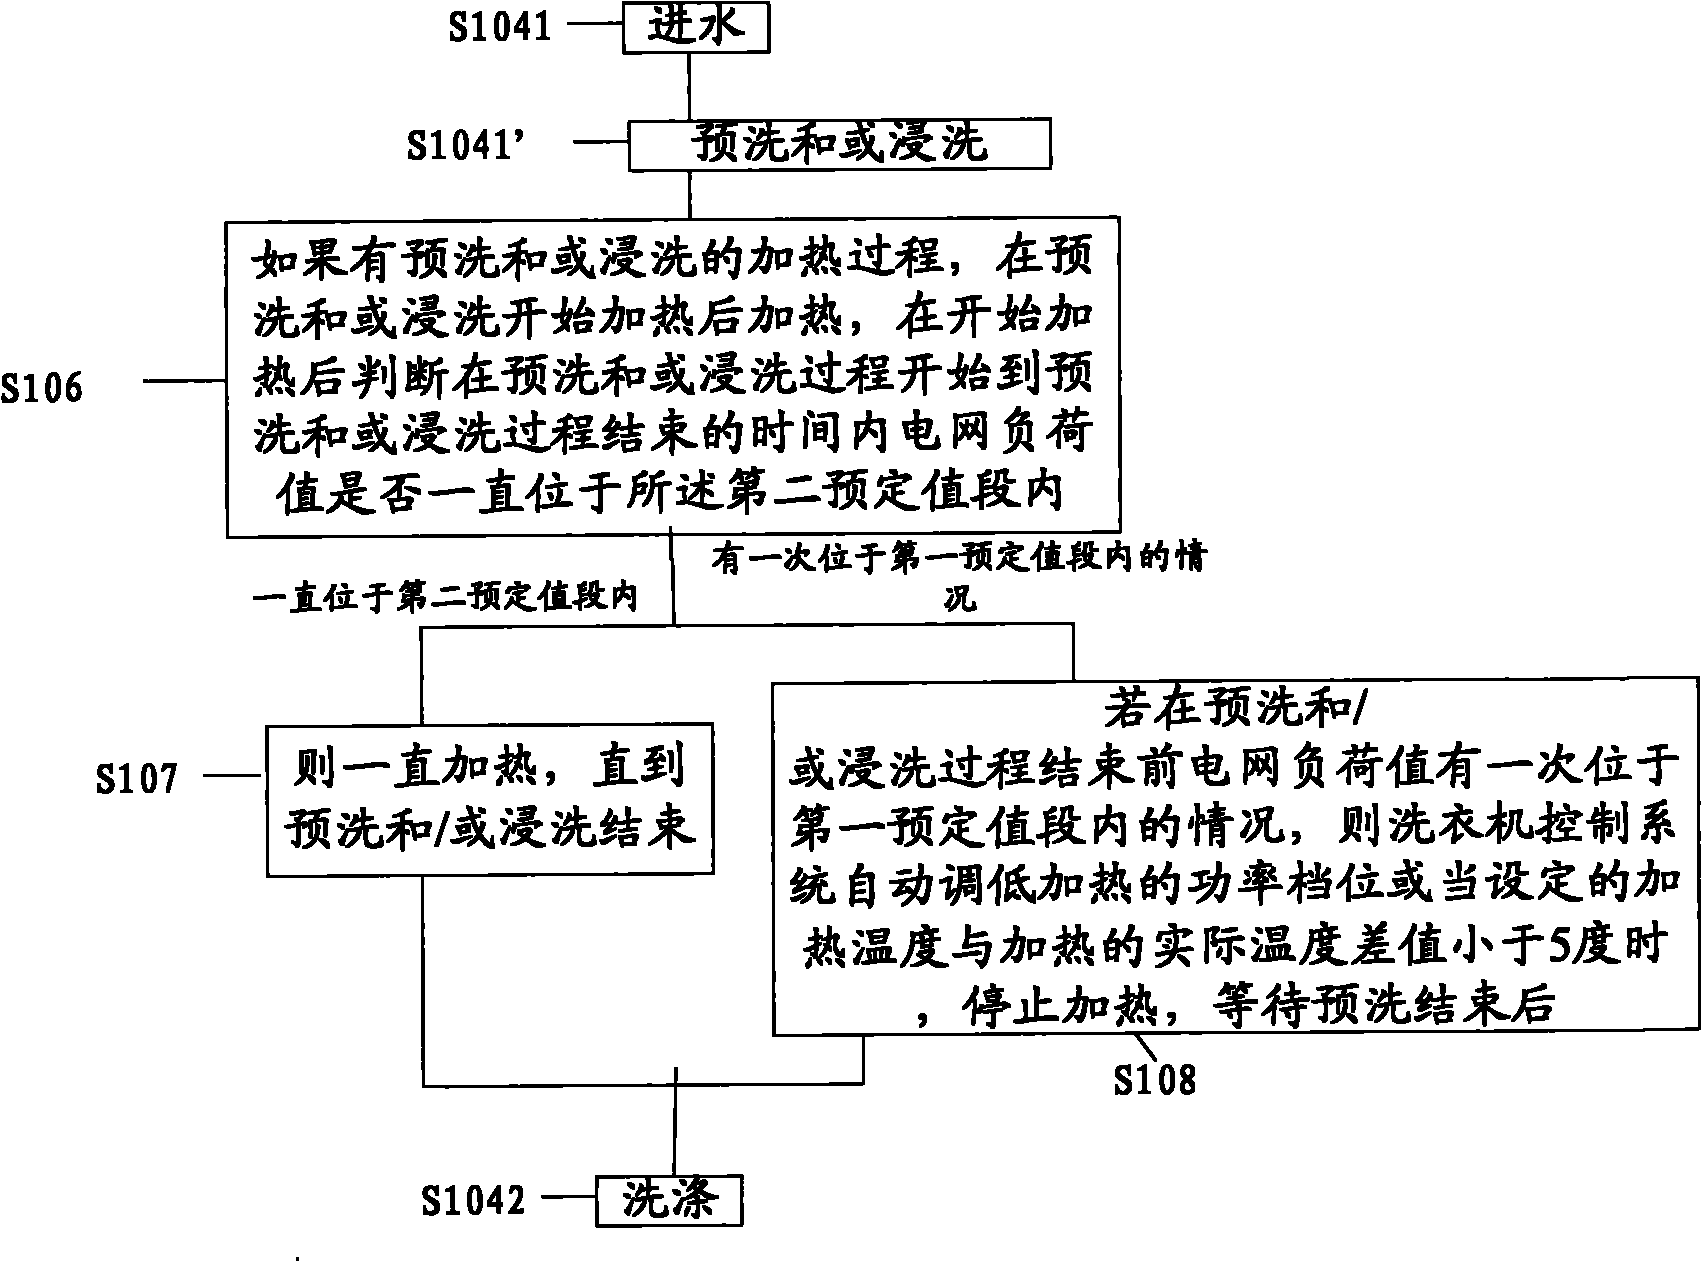 Washing machine control method and system for regulating washing procedure according to network load